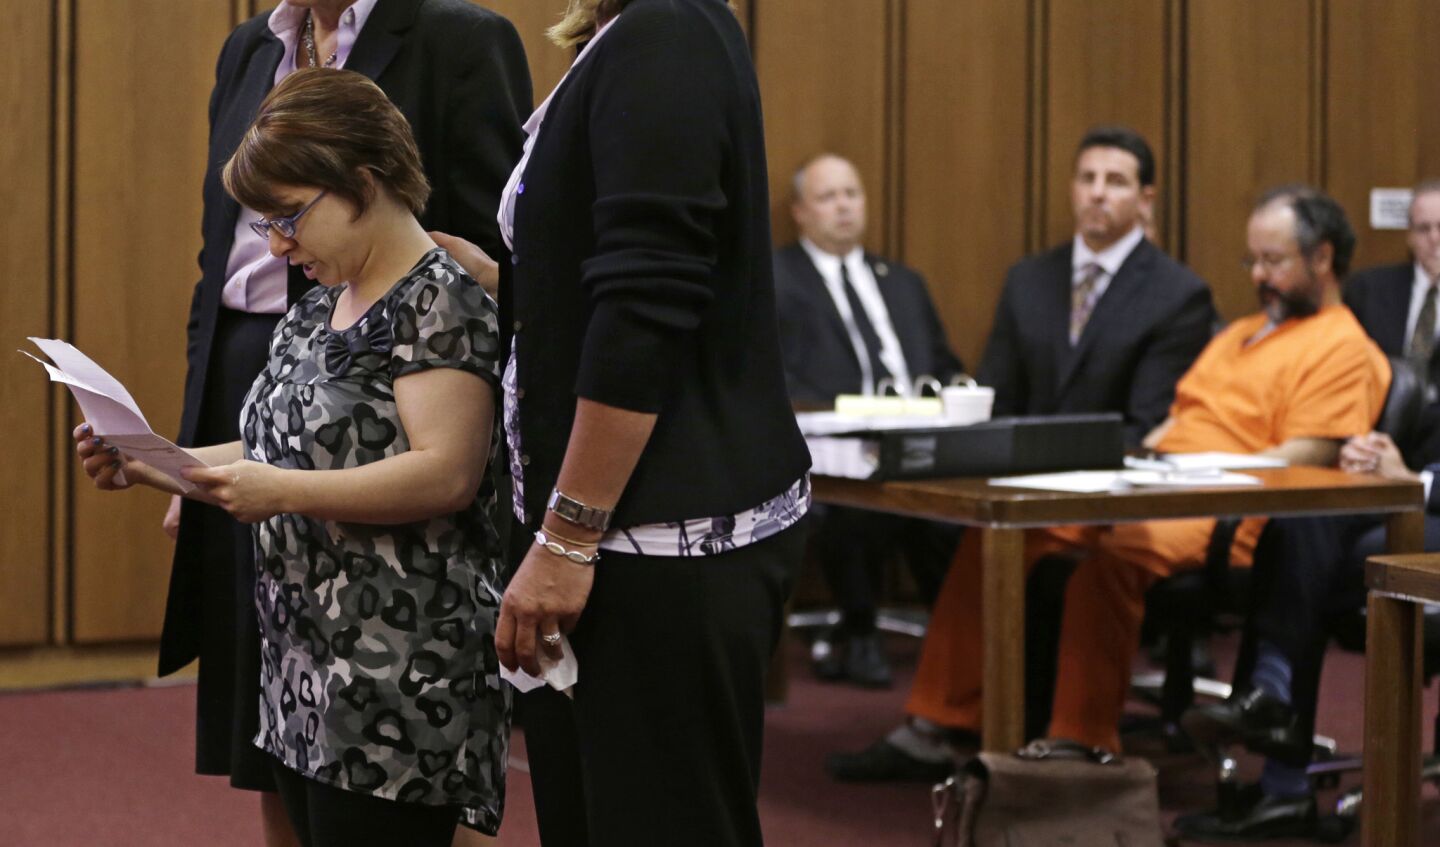 Michelle Knight makes a statement in court before Ariel Castro was sentenced on Aug. 1.